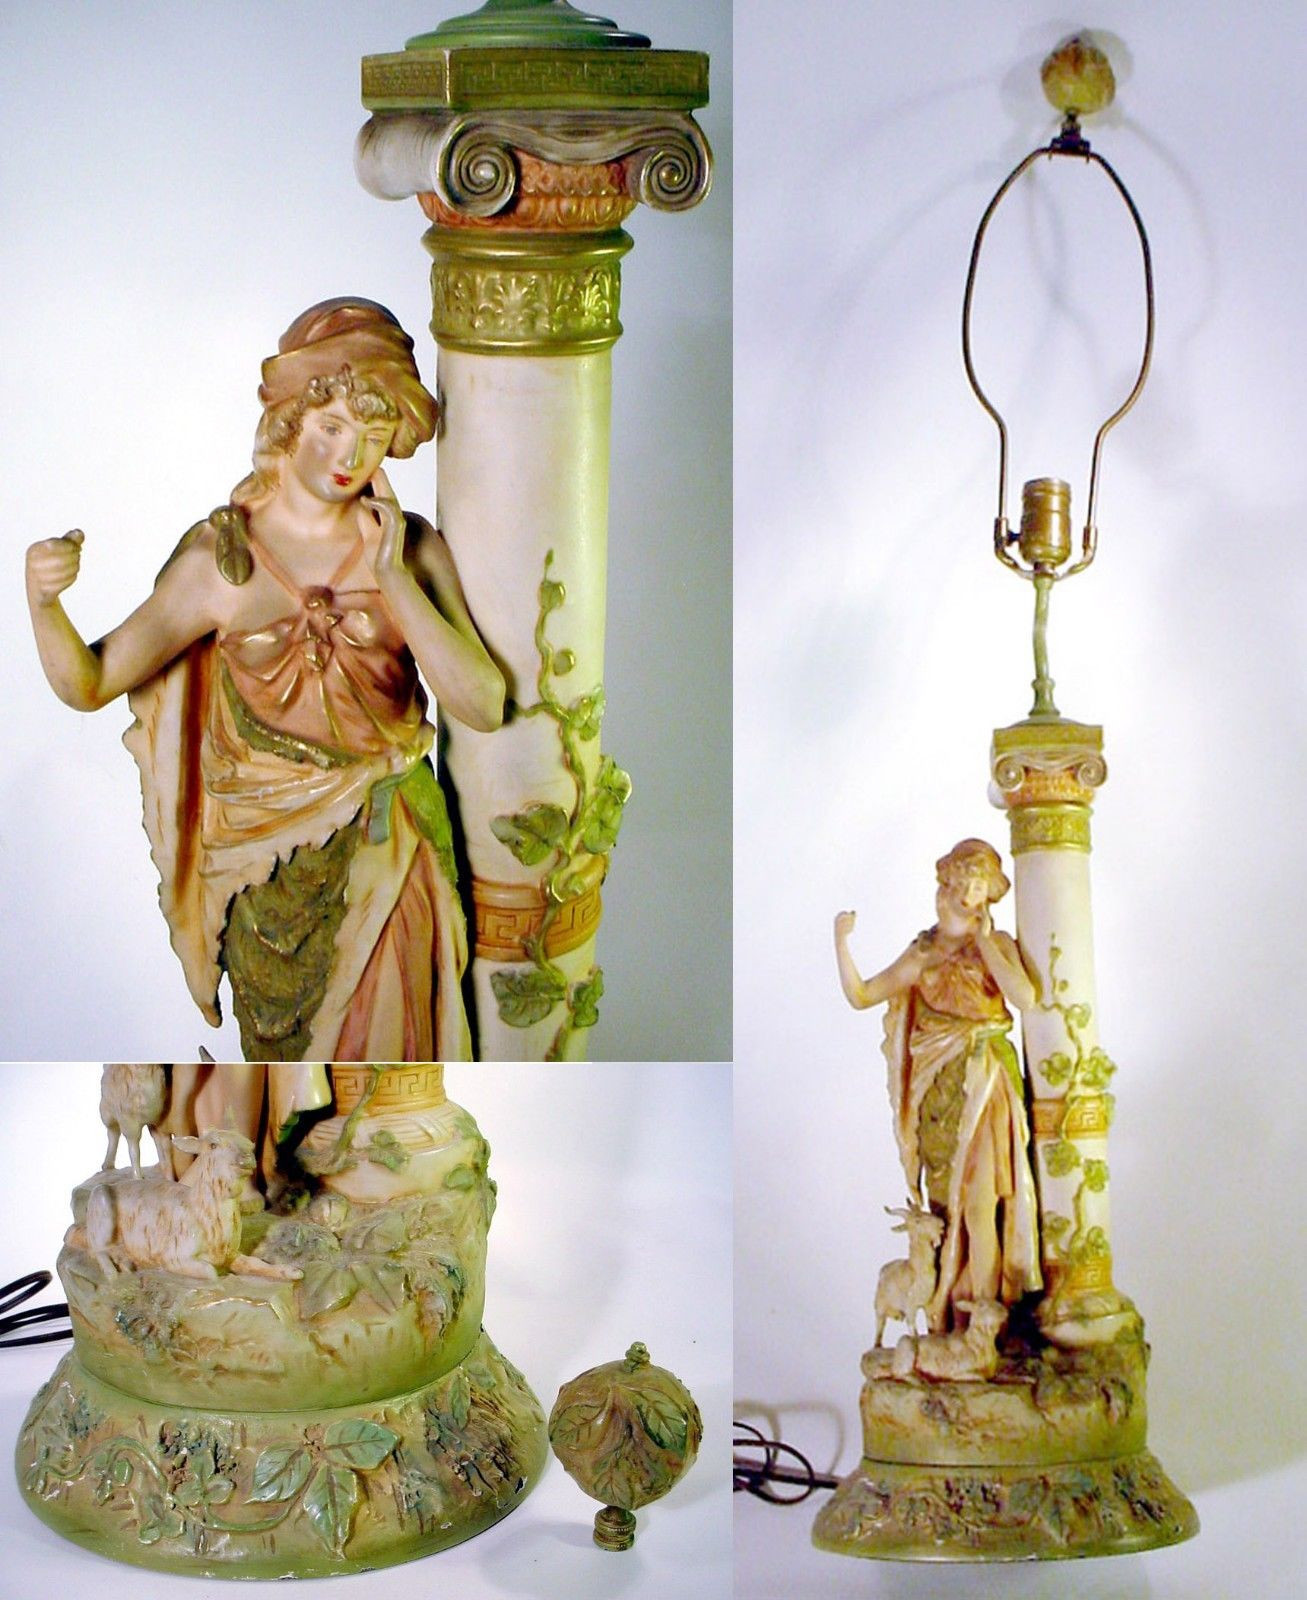 17 Popular Royal Dux Bohemia Vase 2024 free download royal dux bohemia vase of antique royal dux porcelain shepherd lamp miaden statue art nouveau for 1 of 12only 1 available